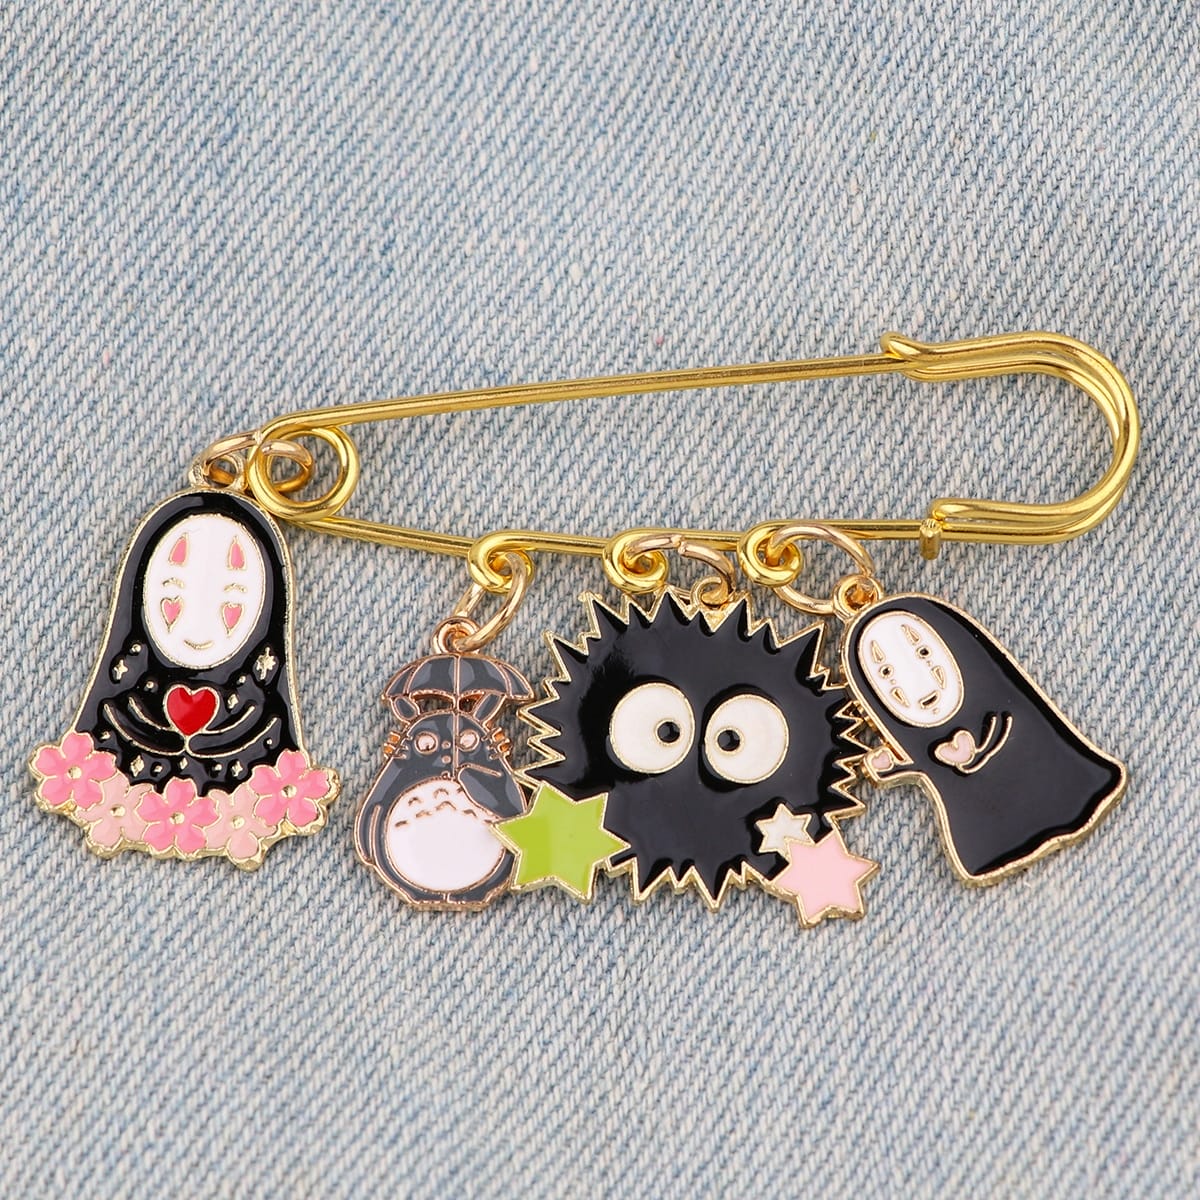 The Adorable Soot Sprites of Spirited Away and My Neighbour Totoro 